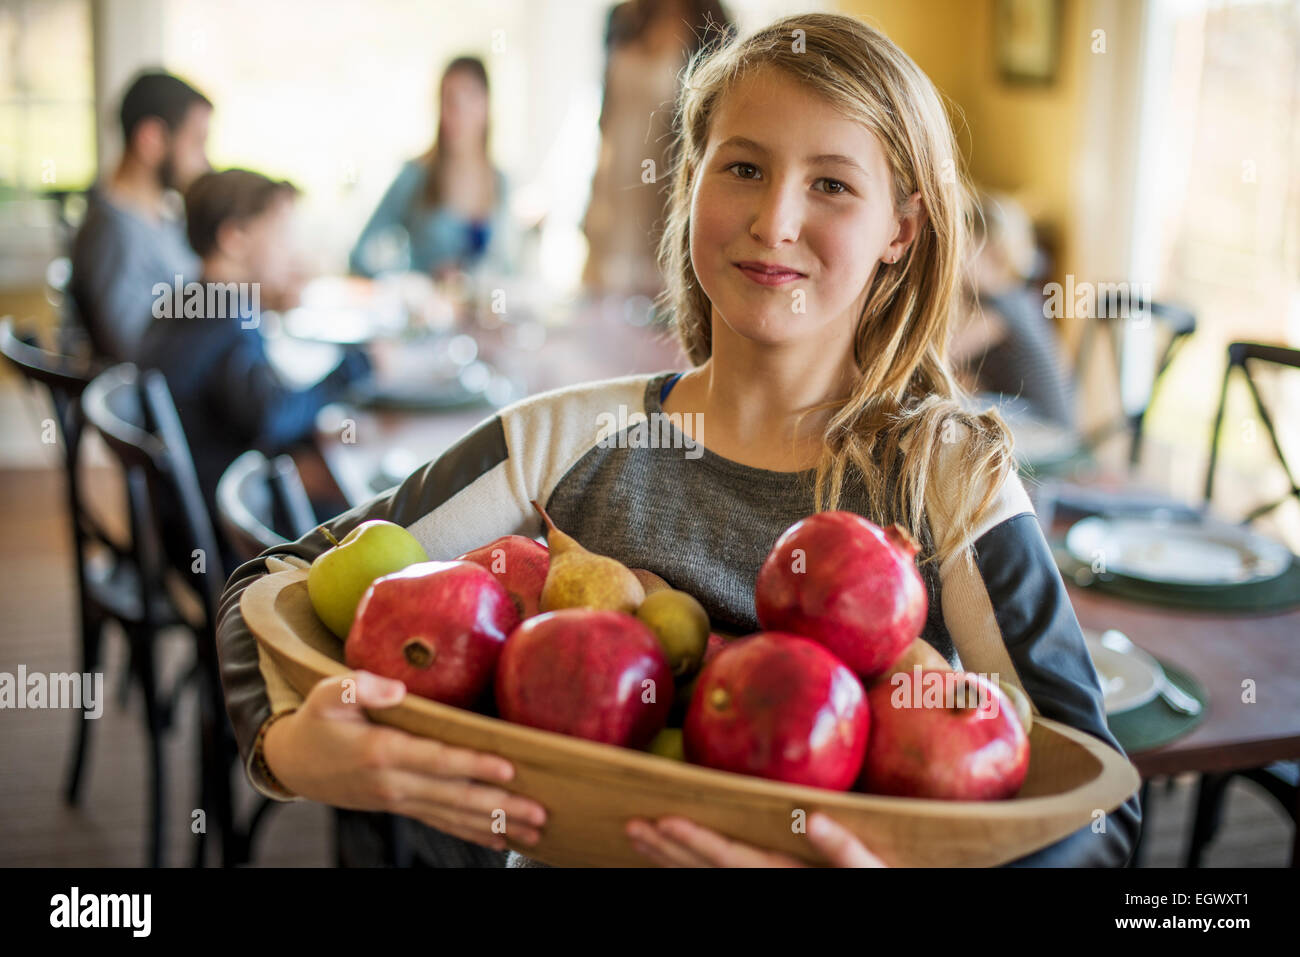 A girl carrying a basket of apples. Stock Photo